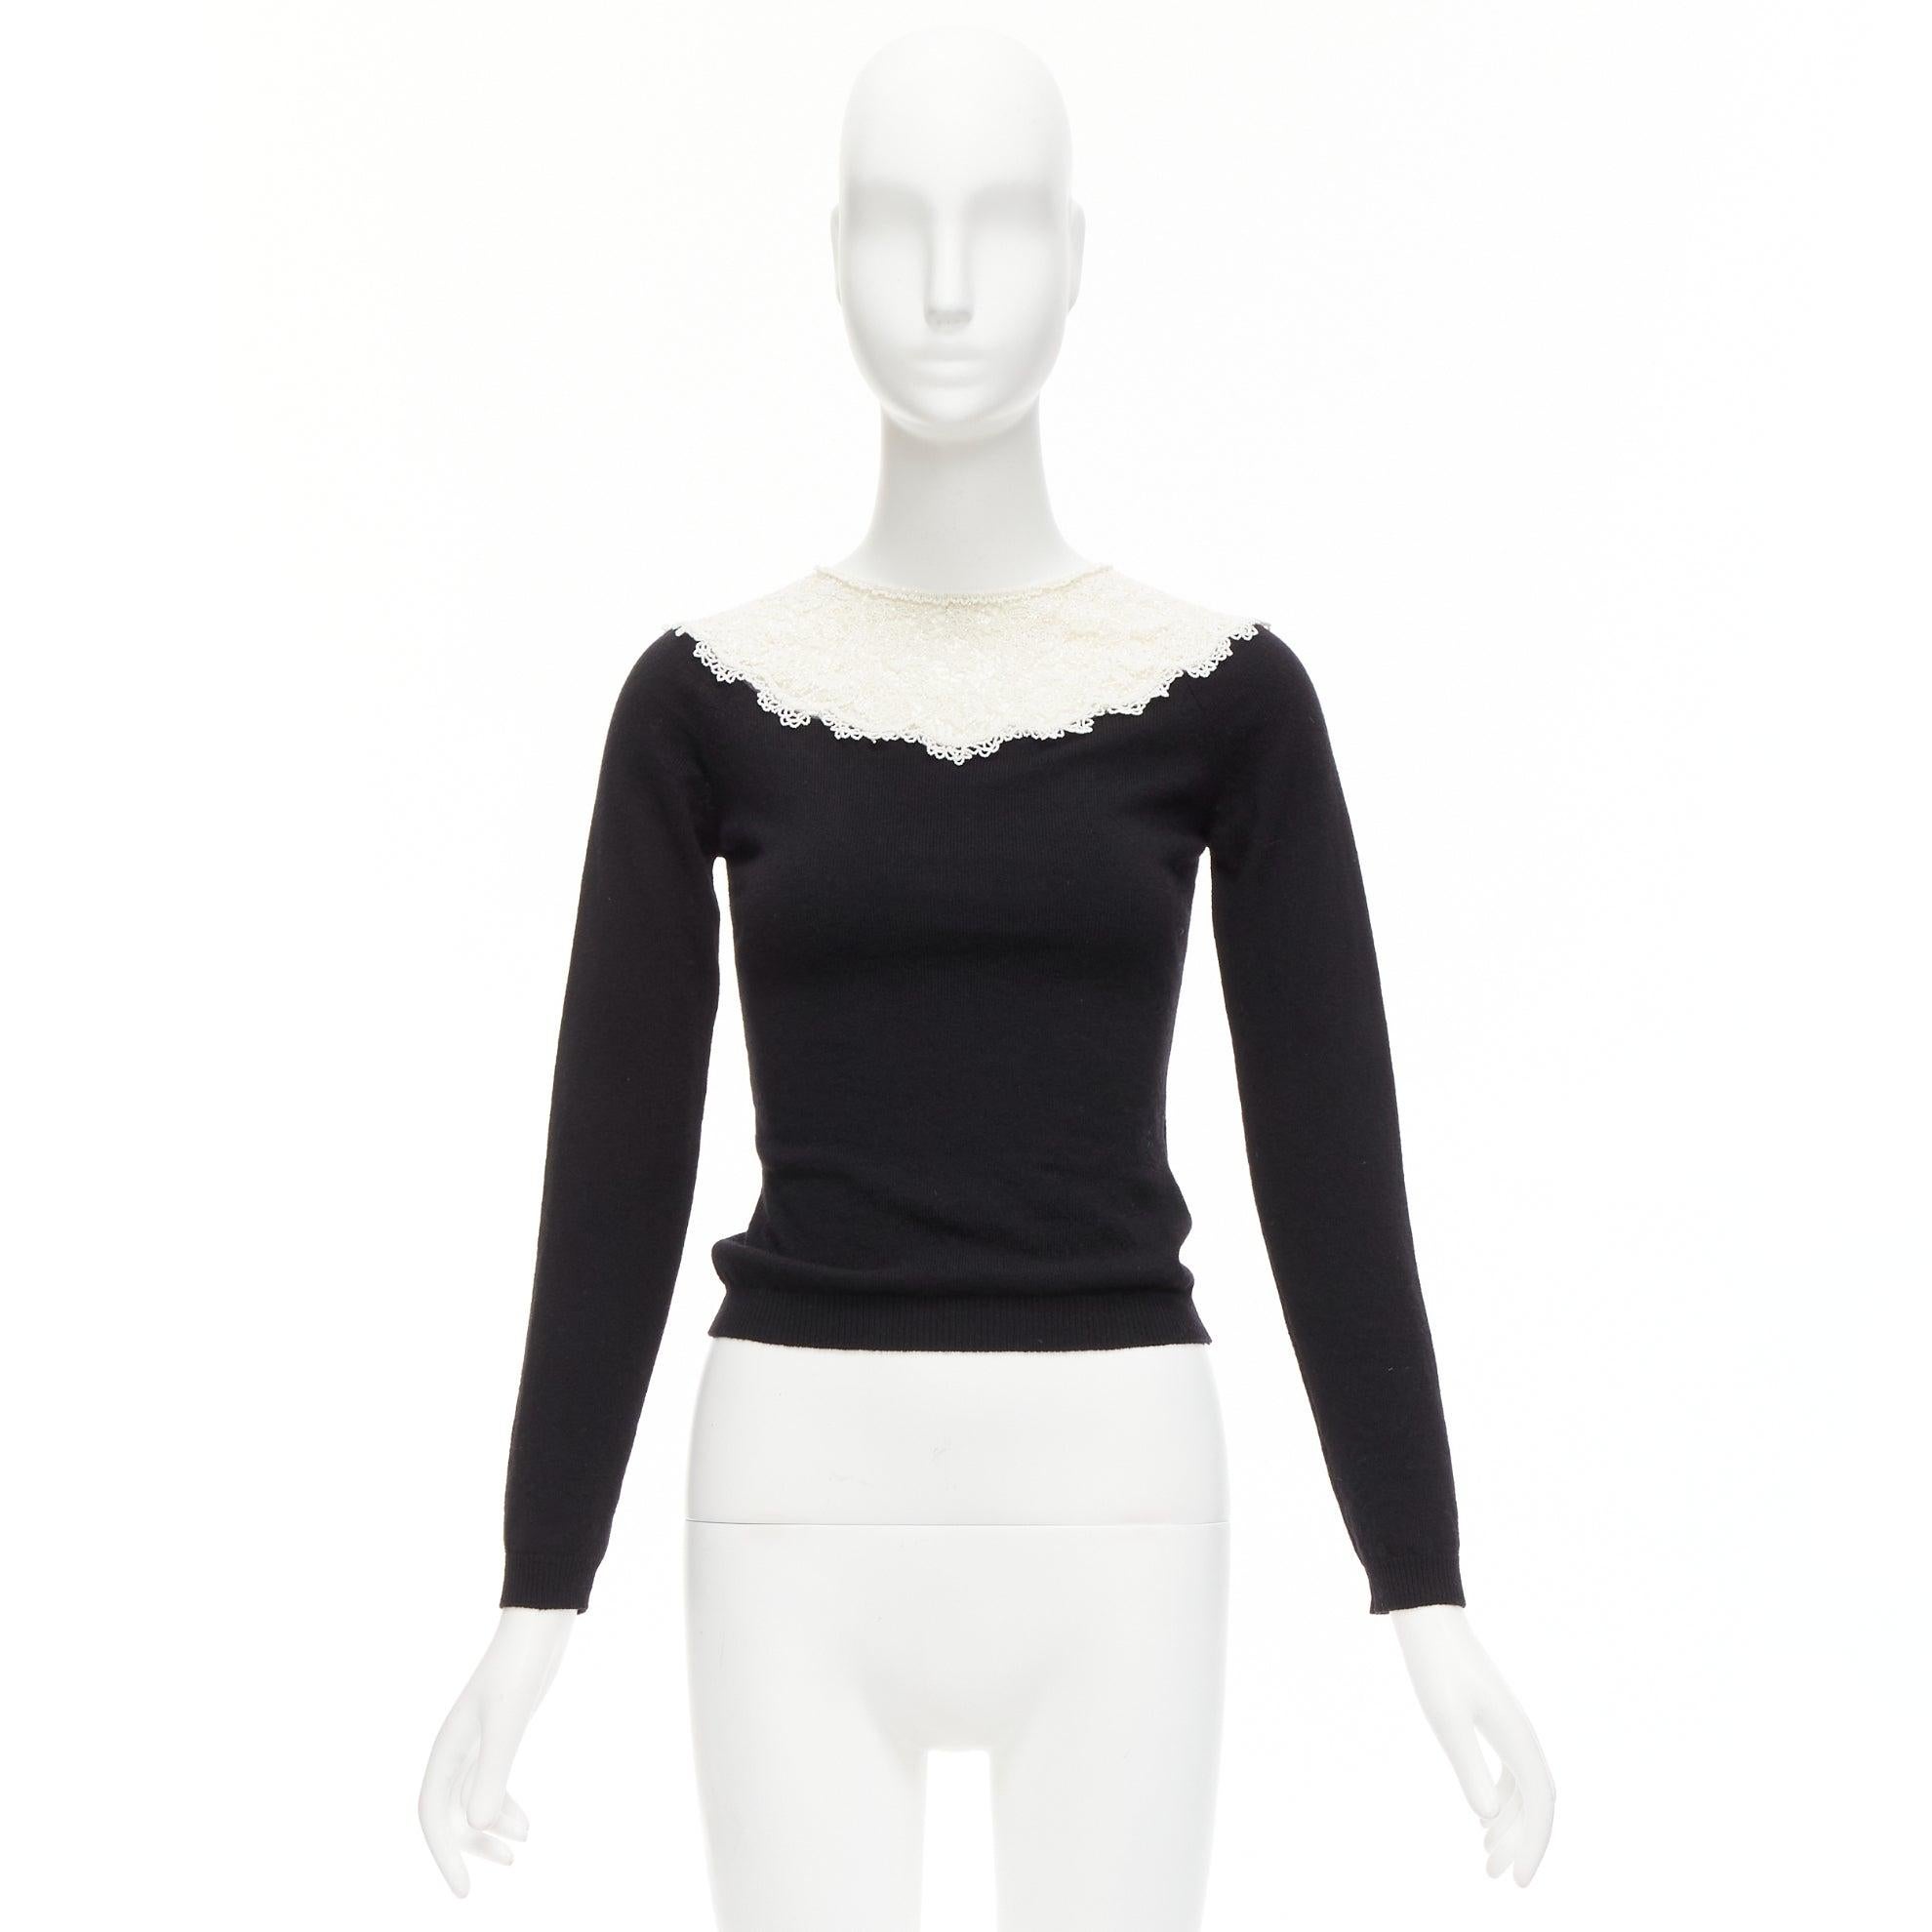 VALENTINO black cream beaded lace collar virgin wool cashmere crop sweater XS
Reference: AAWC/A01095
Brand: Valentino
Designer: Pier Paolo Piccioli
Material: Virgin Wool, Cashmere
Color: Cream, Black
Pattern: Lace
Closure: Zip
Extra Details: Back